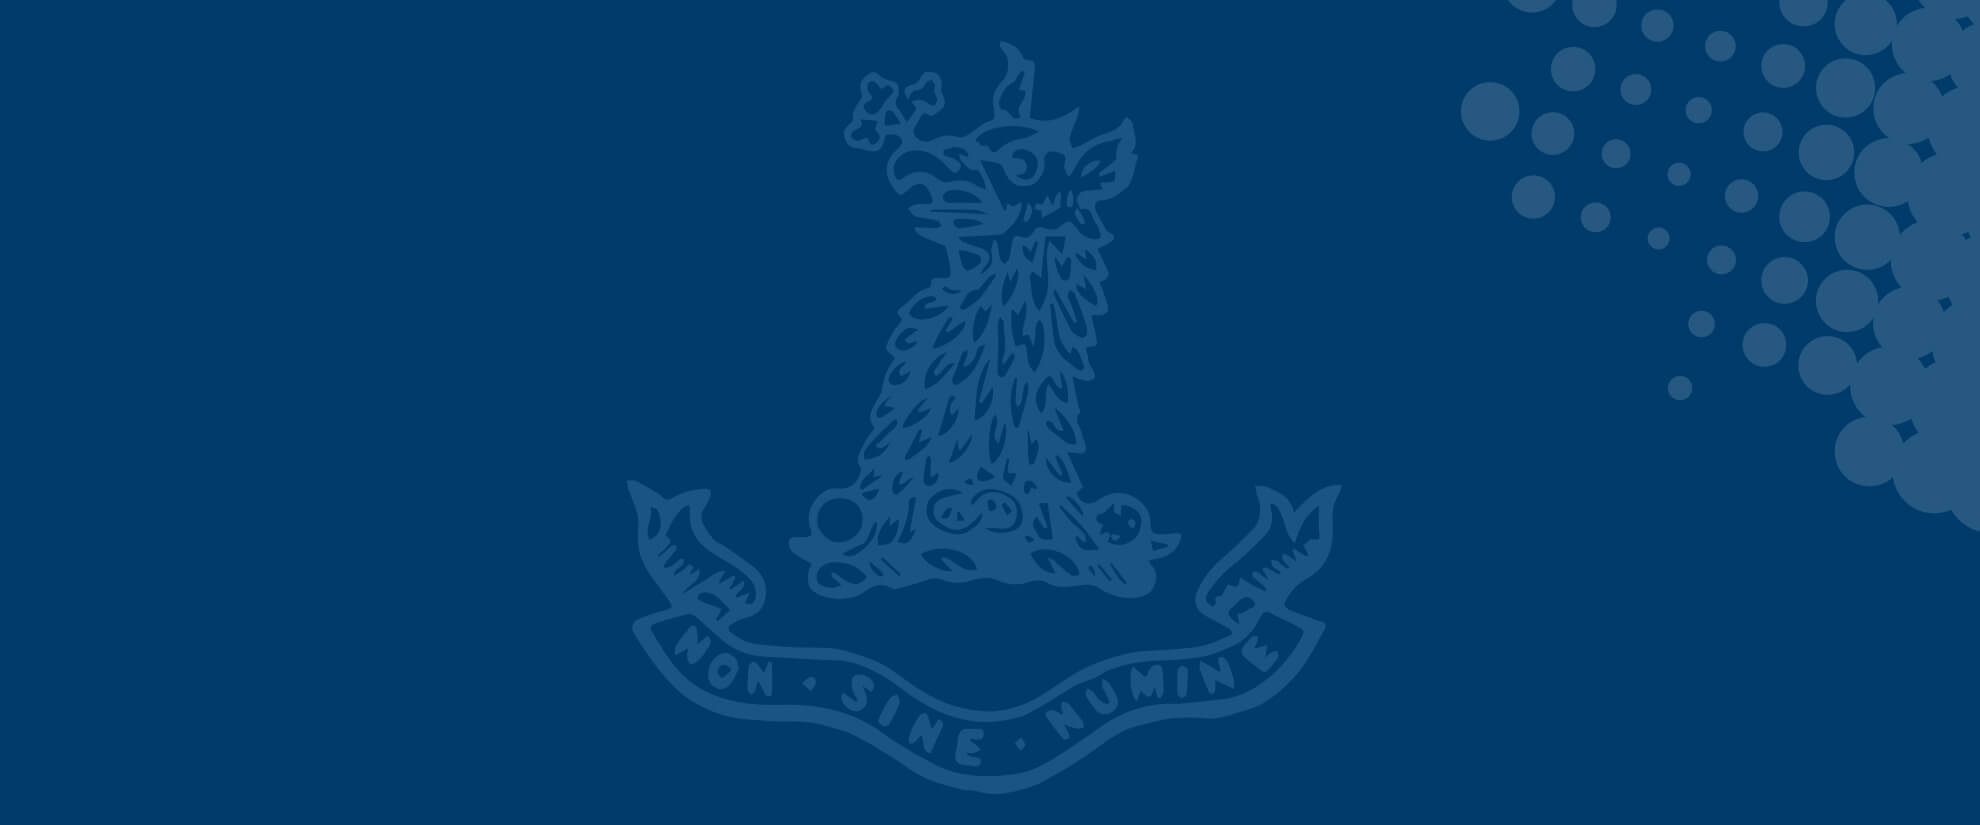 Greene's Education Griffin crest on blue background